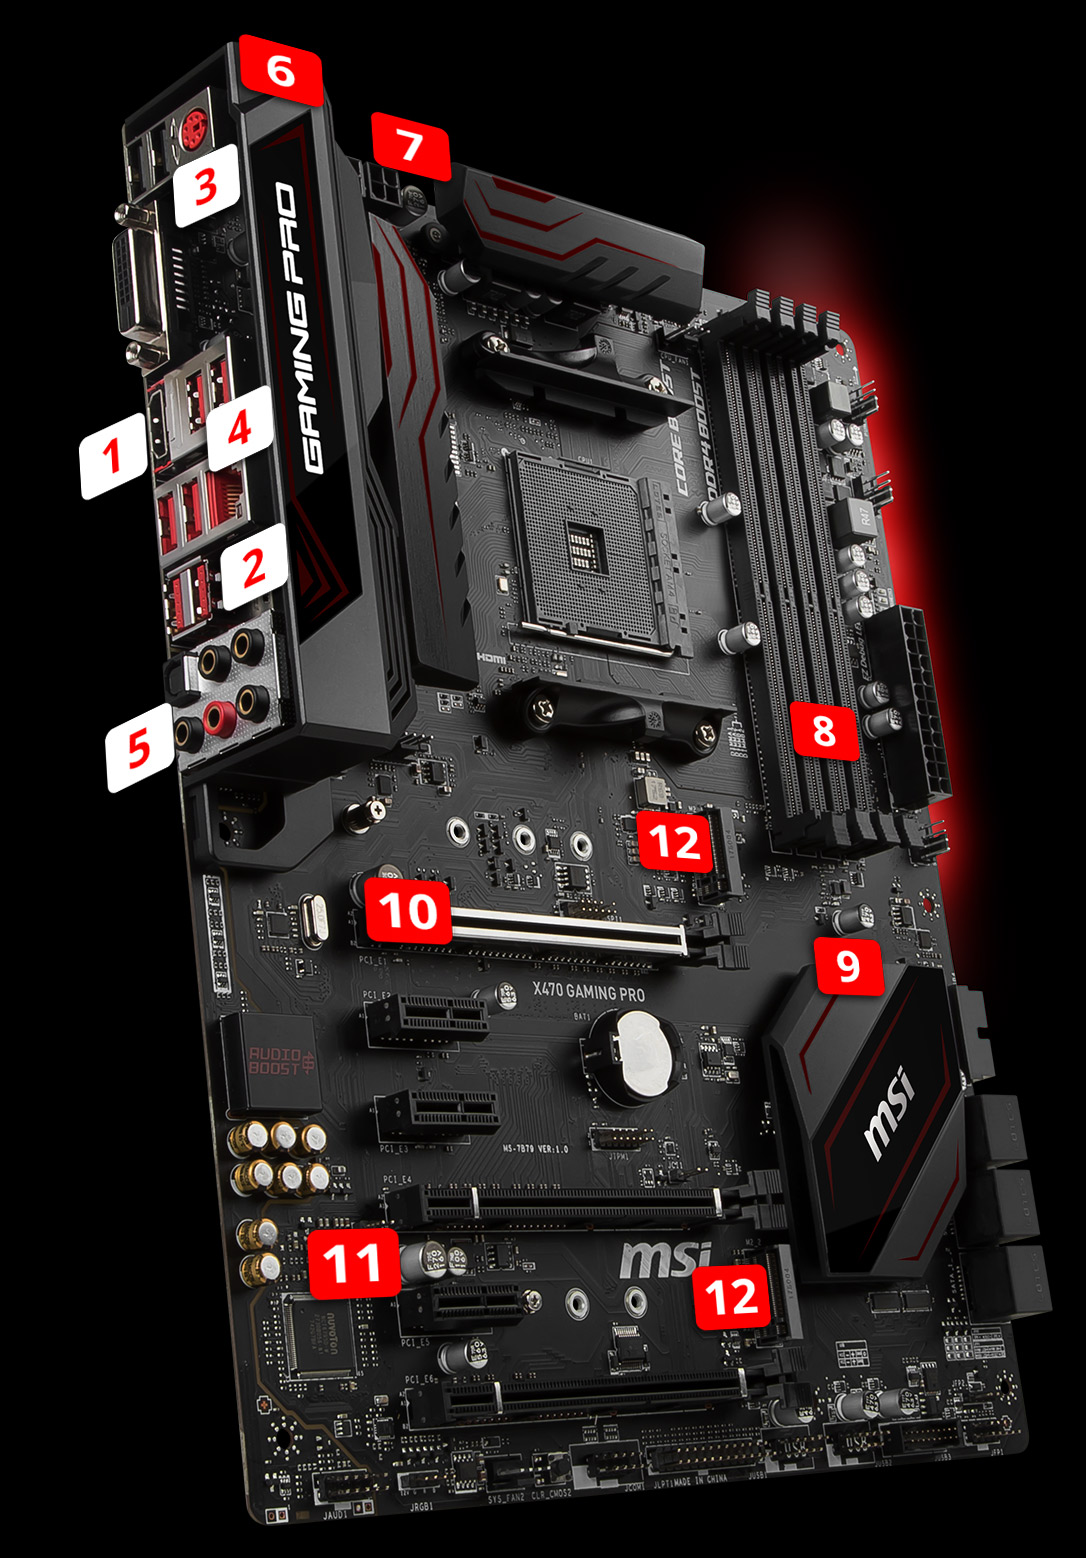 X470 GAMING PRO | Motherboard - The world leader in motherboard design